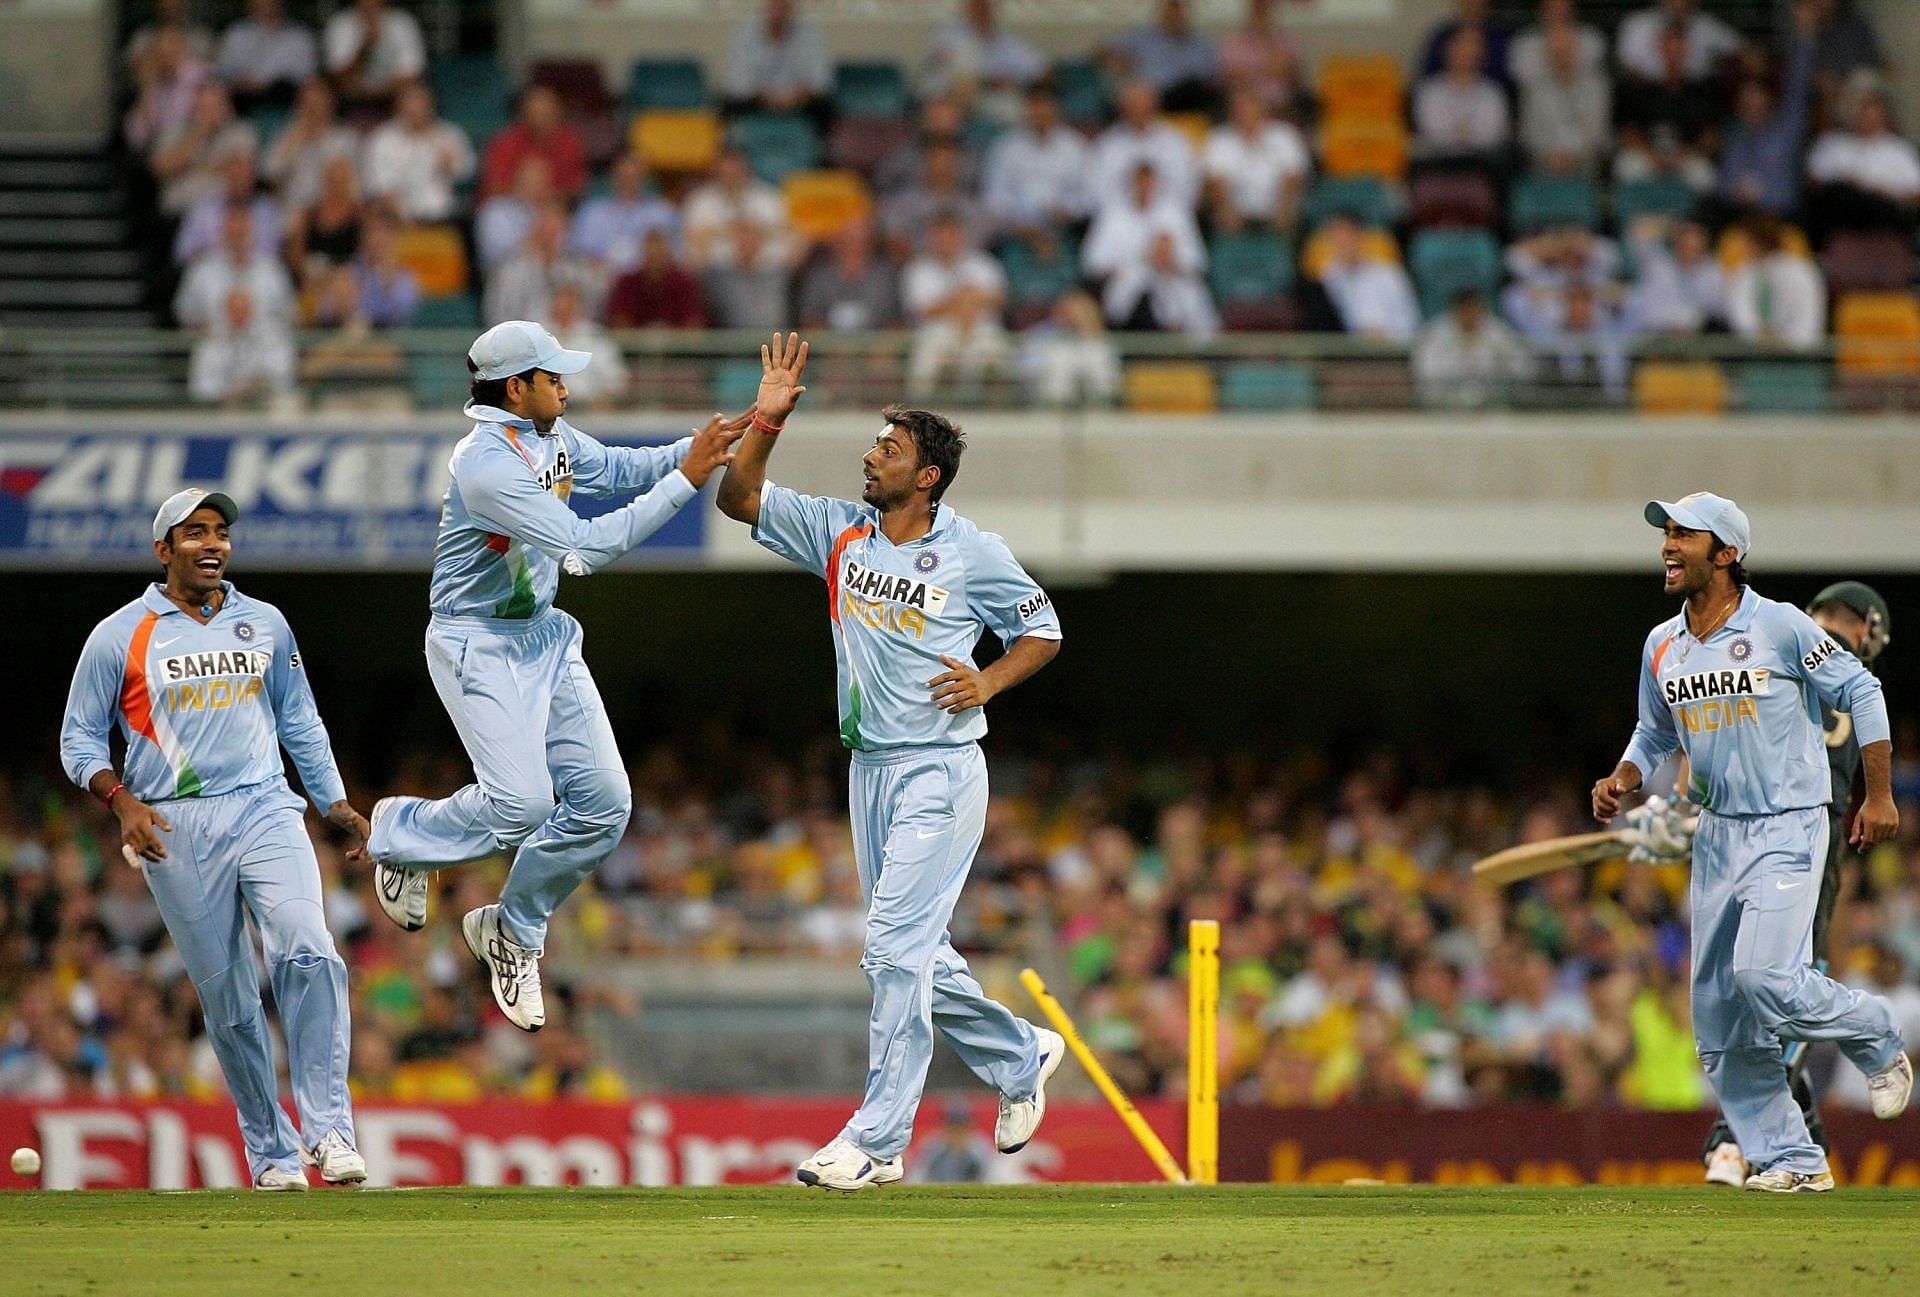 Praveen Kumar celebrates a wicket during the 2008 Commonwealth Bank Series. Pic: Getty Images